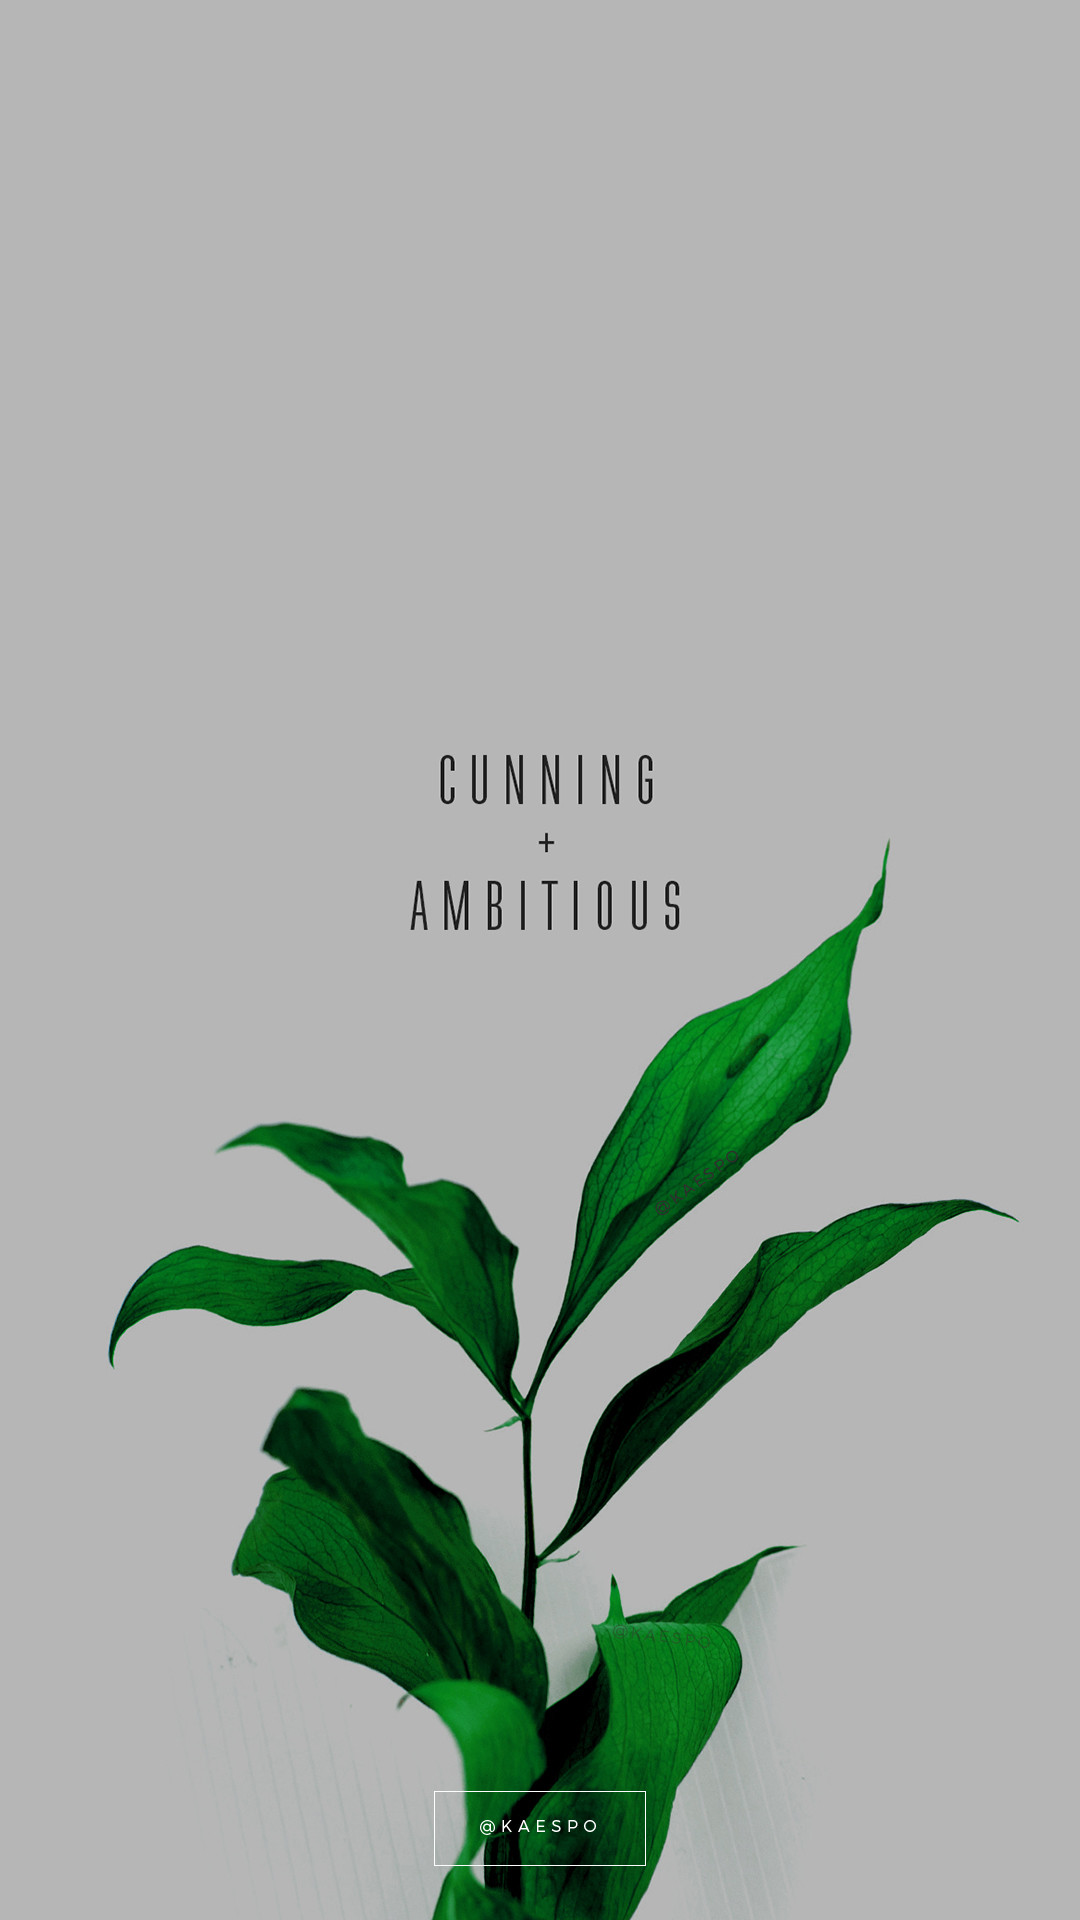 Cunning And Ambitious Slytherin Quote on Green Floral Background by kaespo